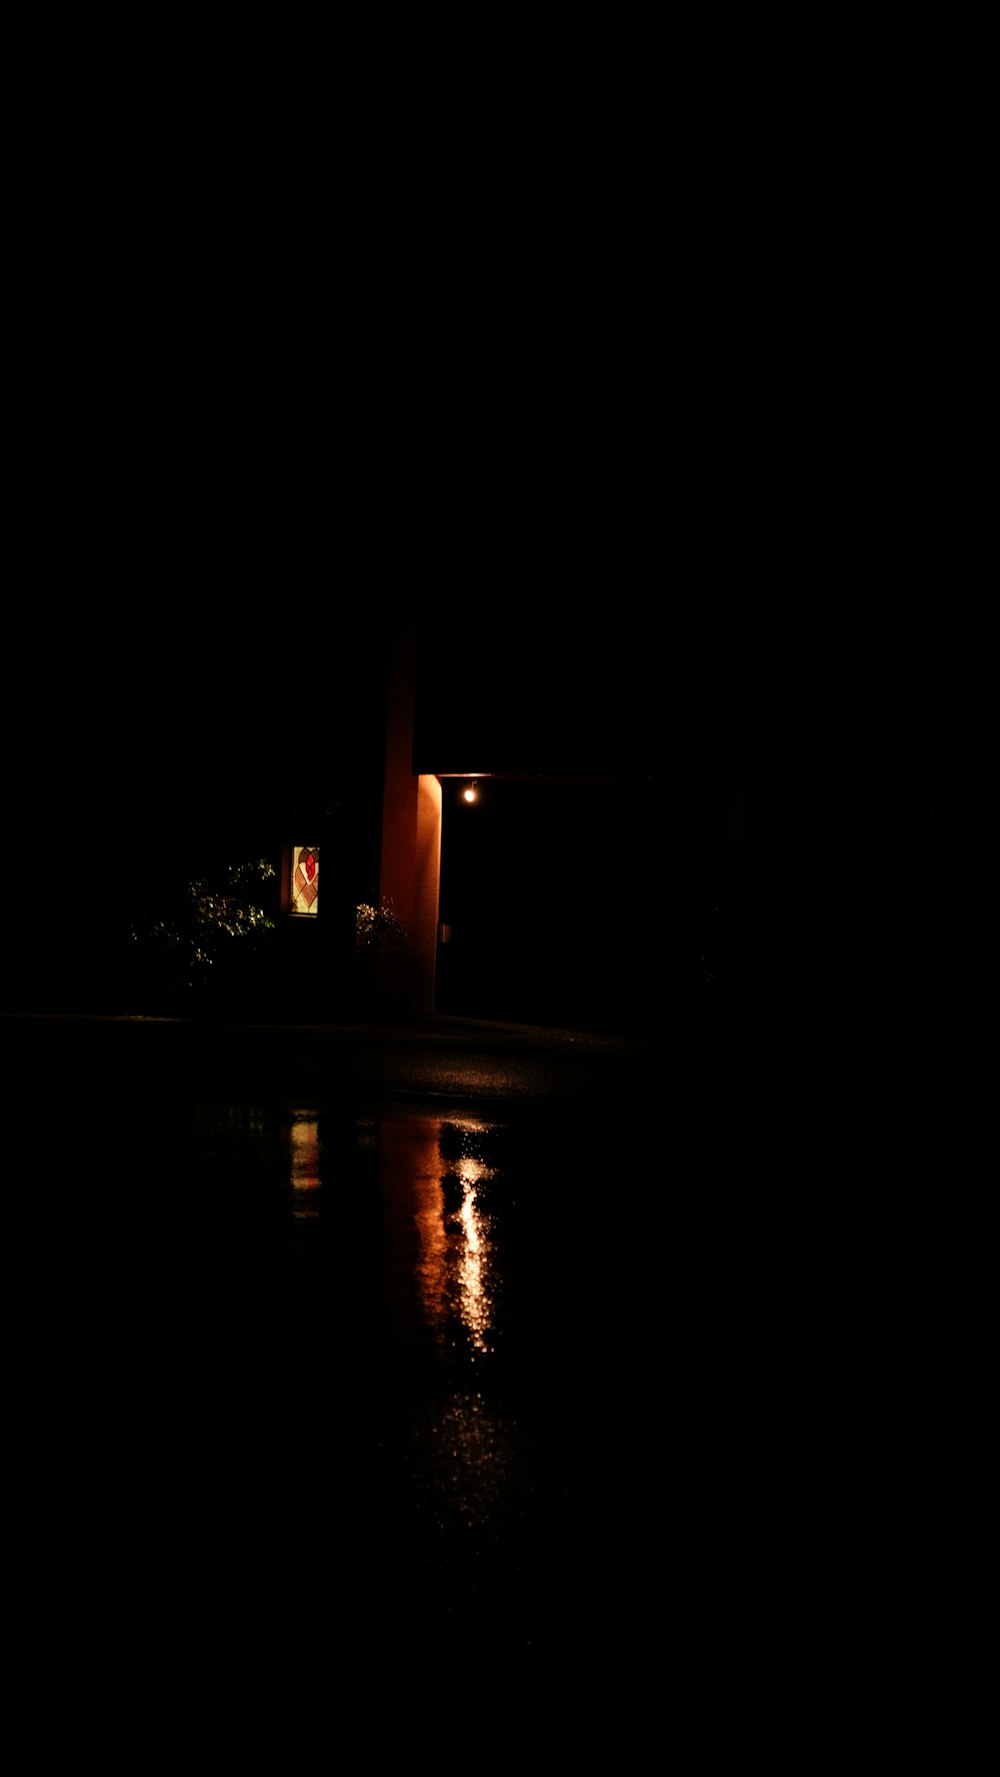 a dark picture of a building and a street light